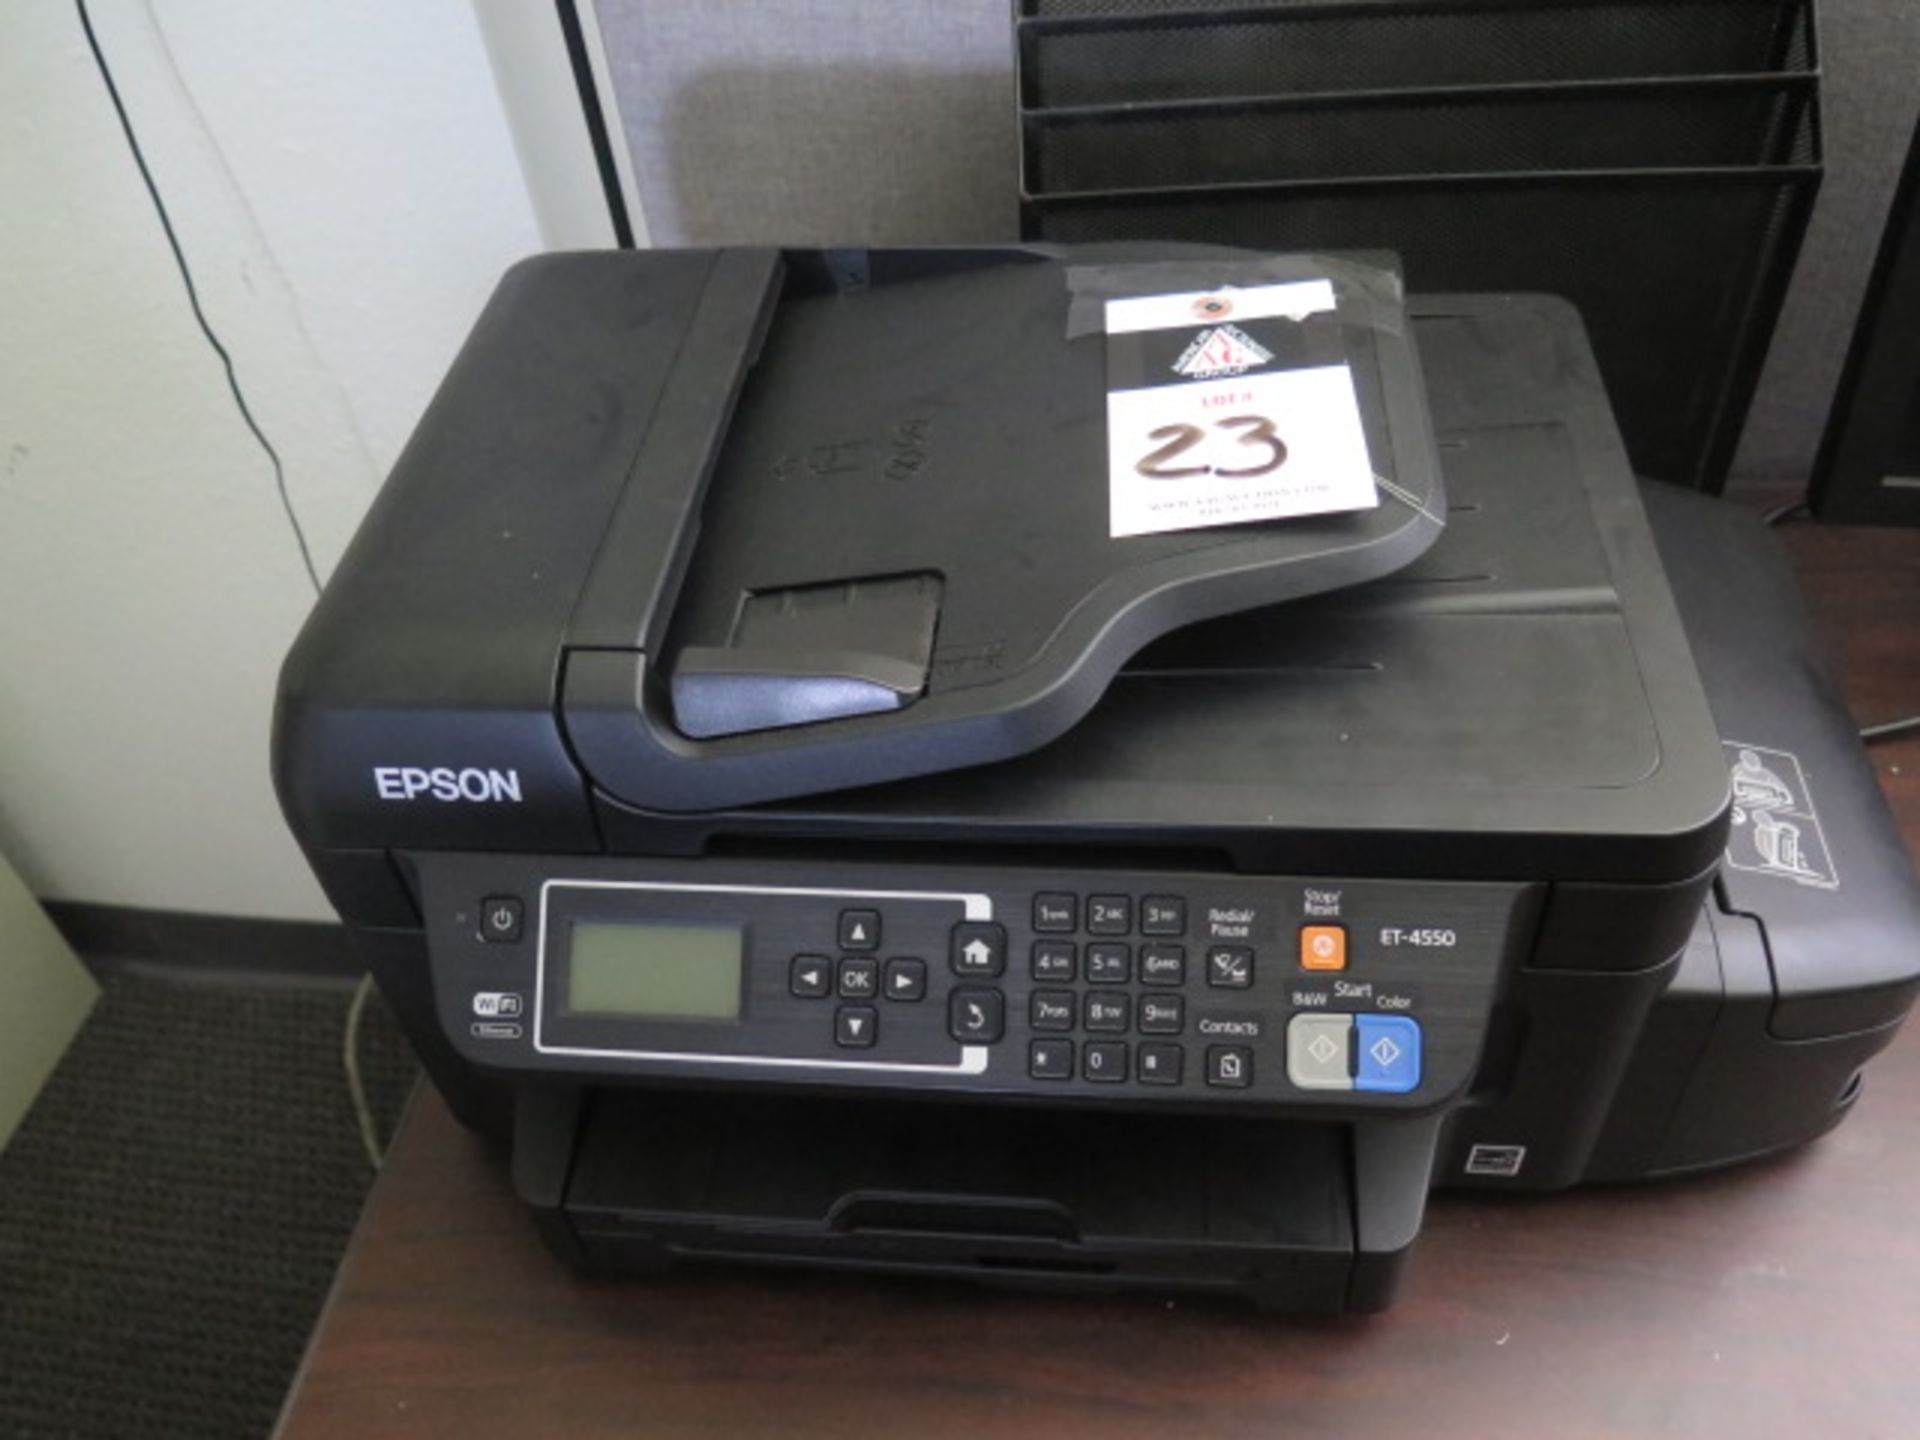 Epson ET-4550 Printer (SOLD AS-IS - NO WARRANTY)